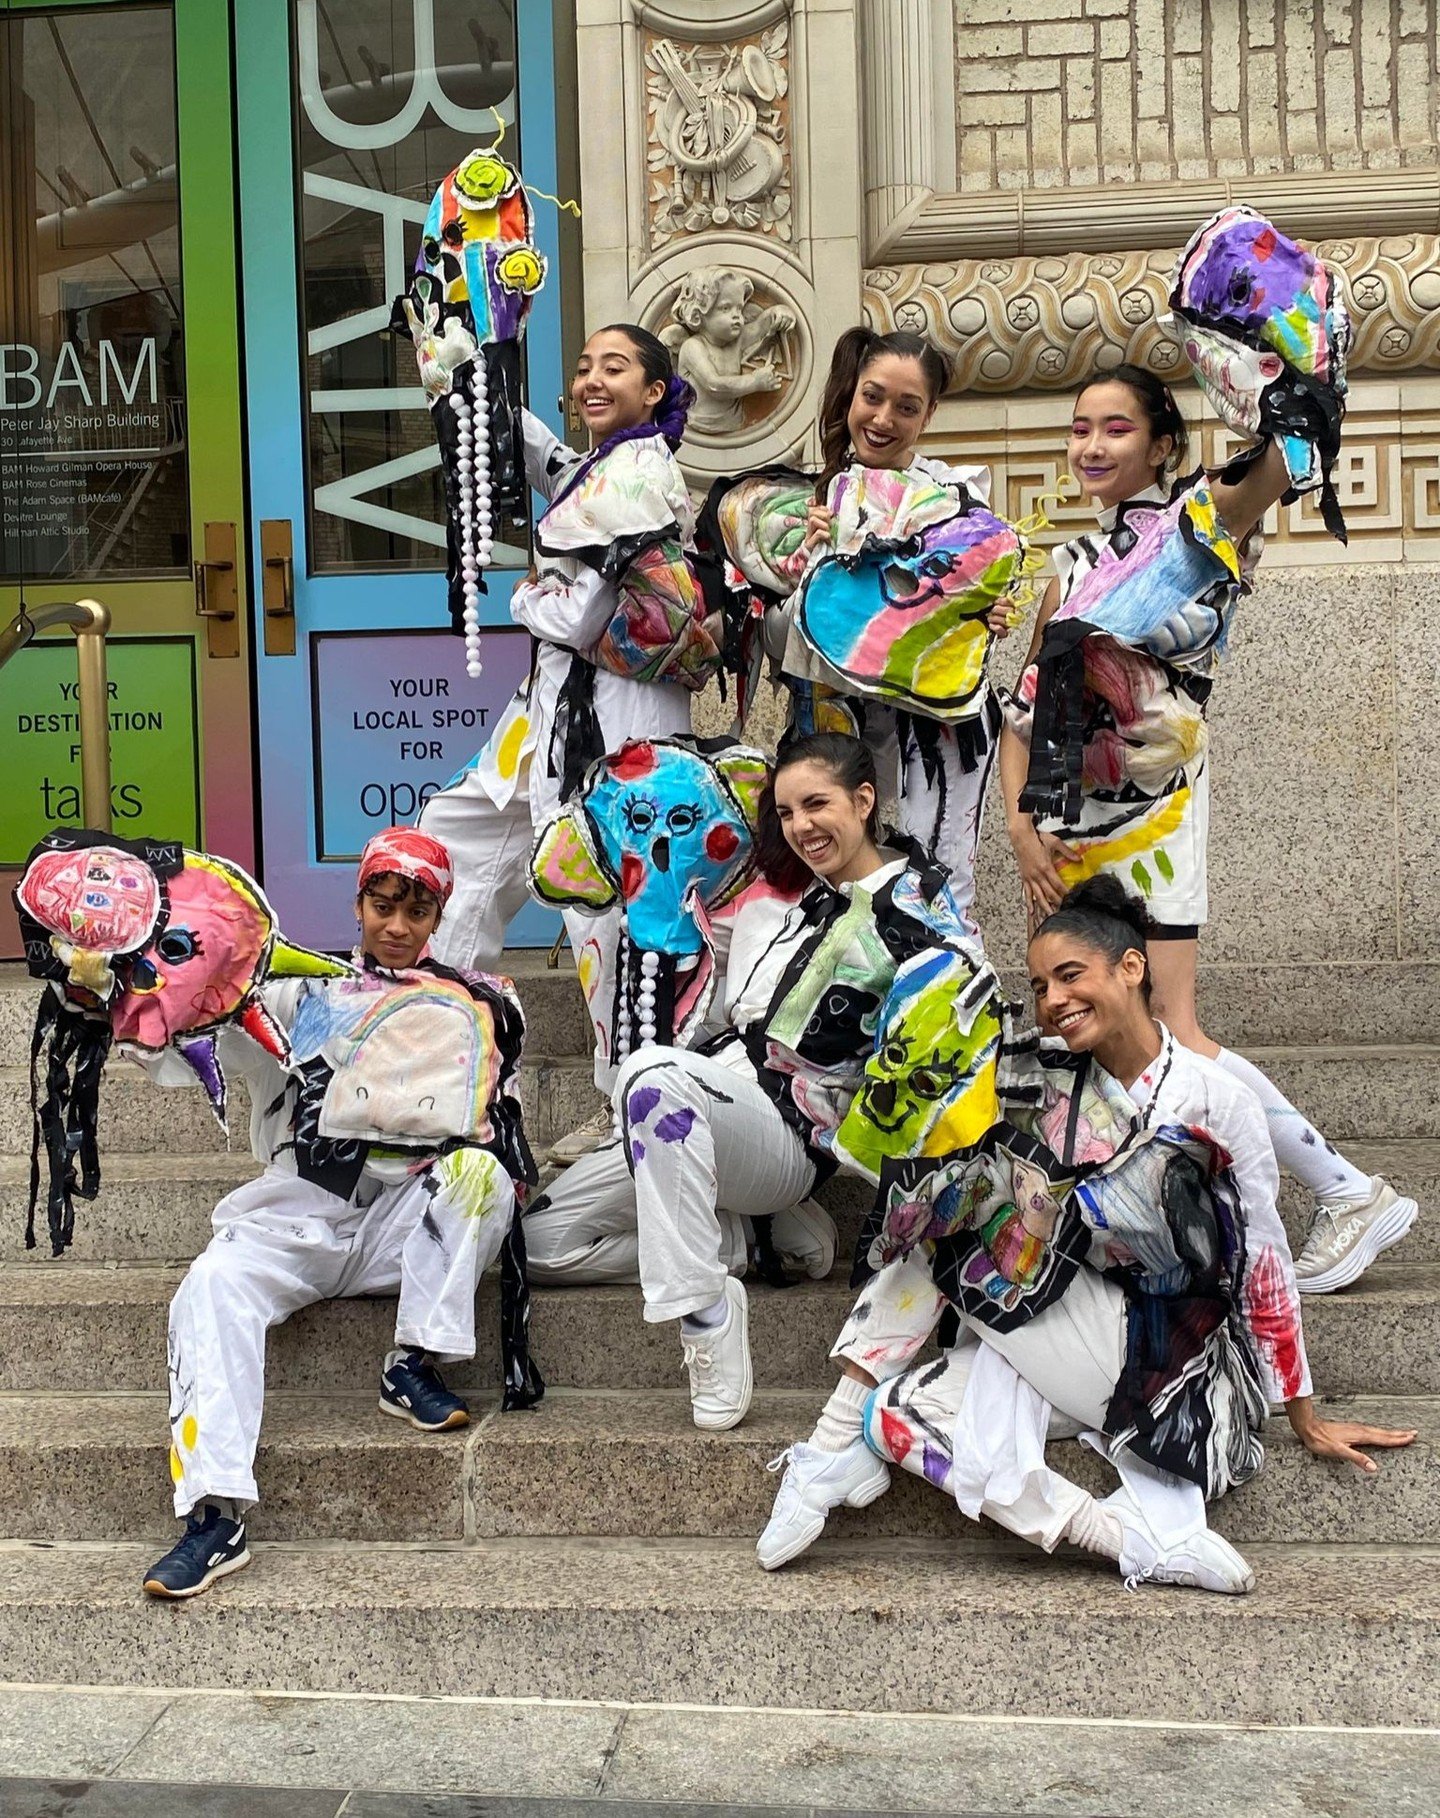 A glimpse into ~Creatures of Myth~. Just spent the last few weeks in NYC, working on this multidisciplinary street performance project, blending so many worlds together. Opera, a string quartet, salsa, dancing, kids art, etc... I did the visual desig